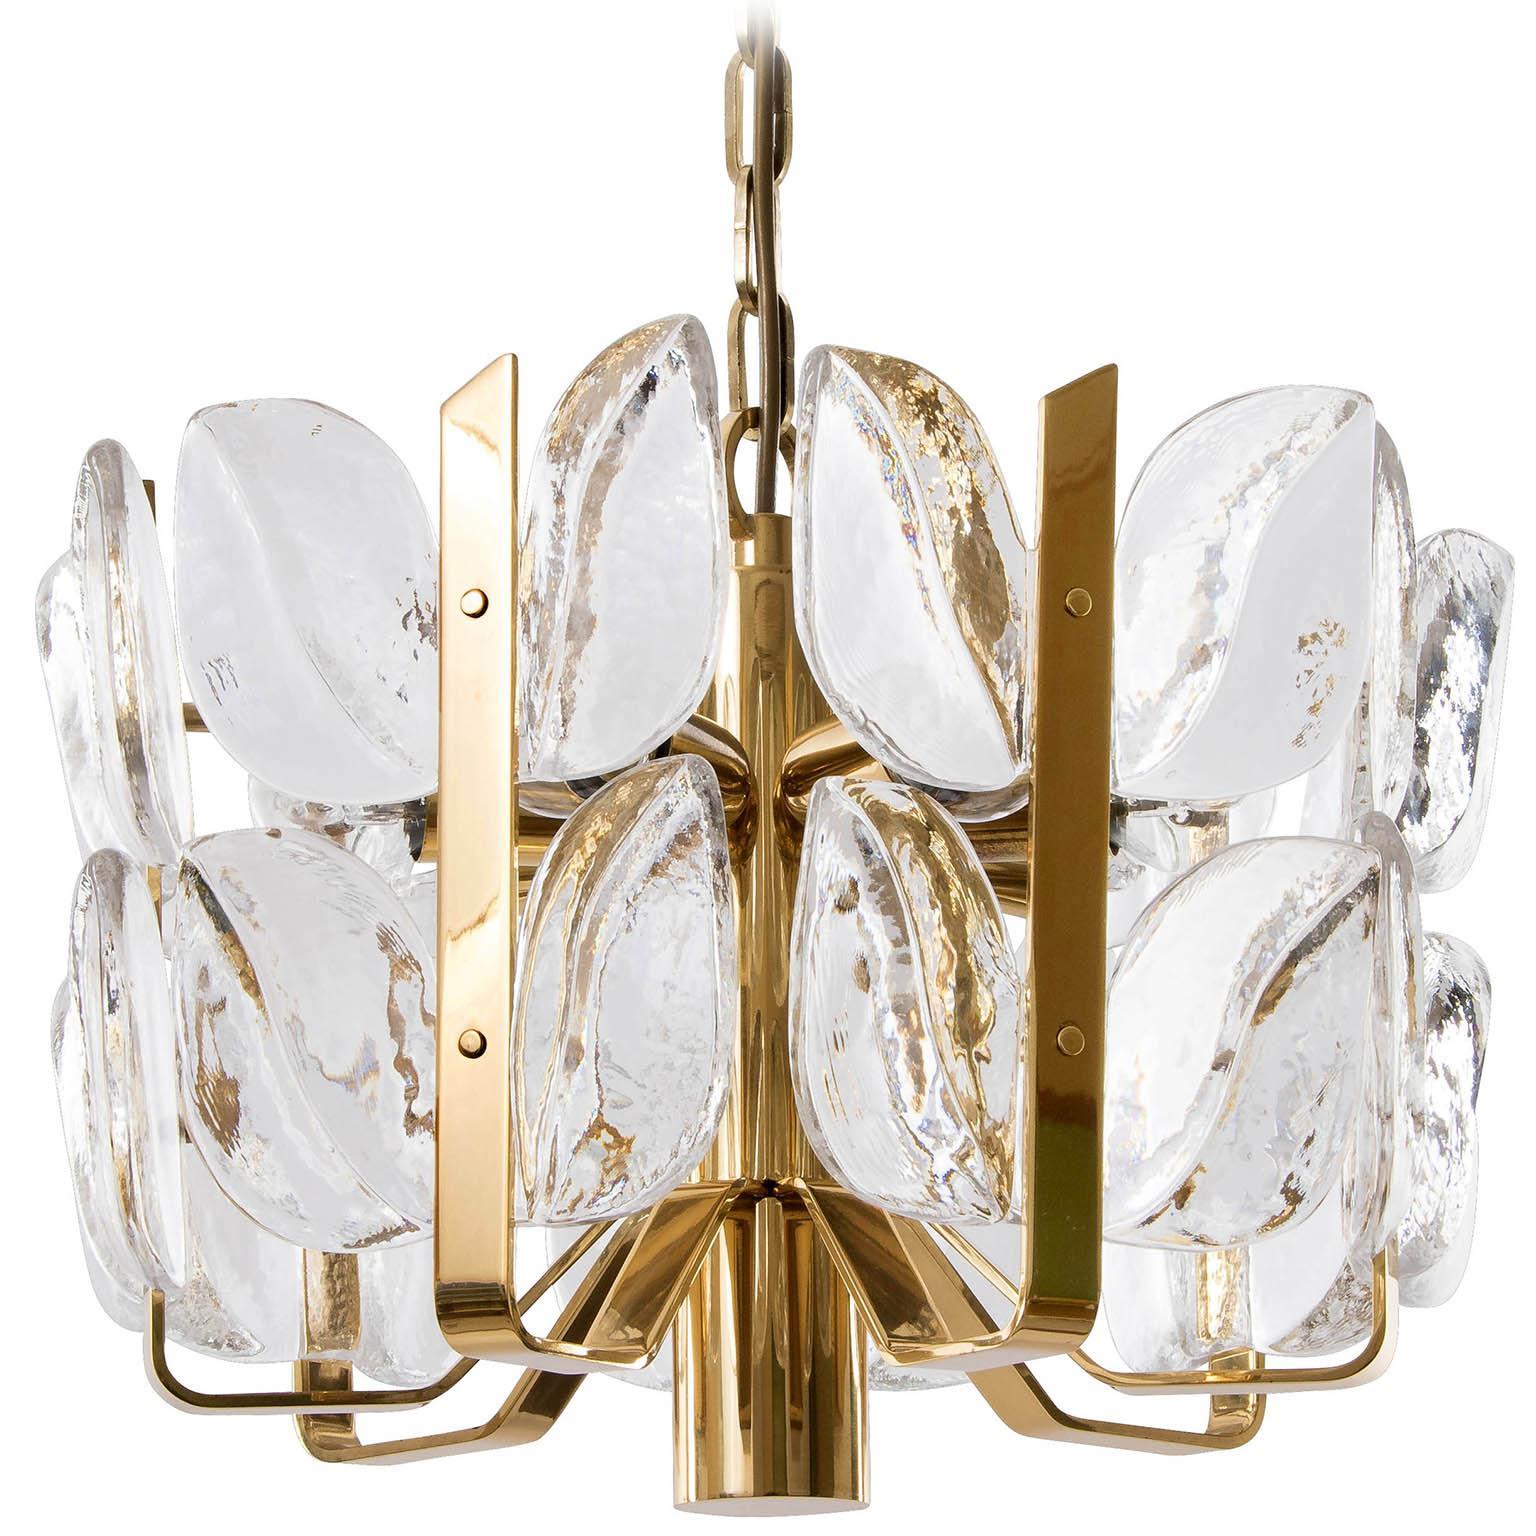 A gorgeous high quality pendant light fixture model 'Florida' by J.T. Kalmar, Austria, manufactured in midcentury, circa 1970 (late 1960s or early 1970s).
The lamp is made of polished brass and large fire-polished brilliant crystal glass pieces in